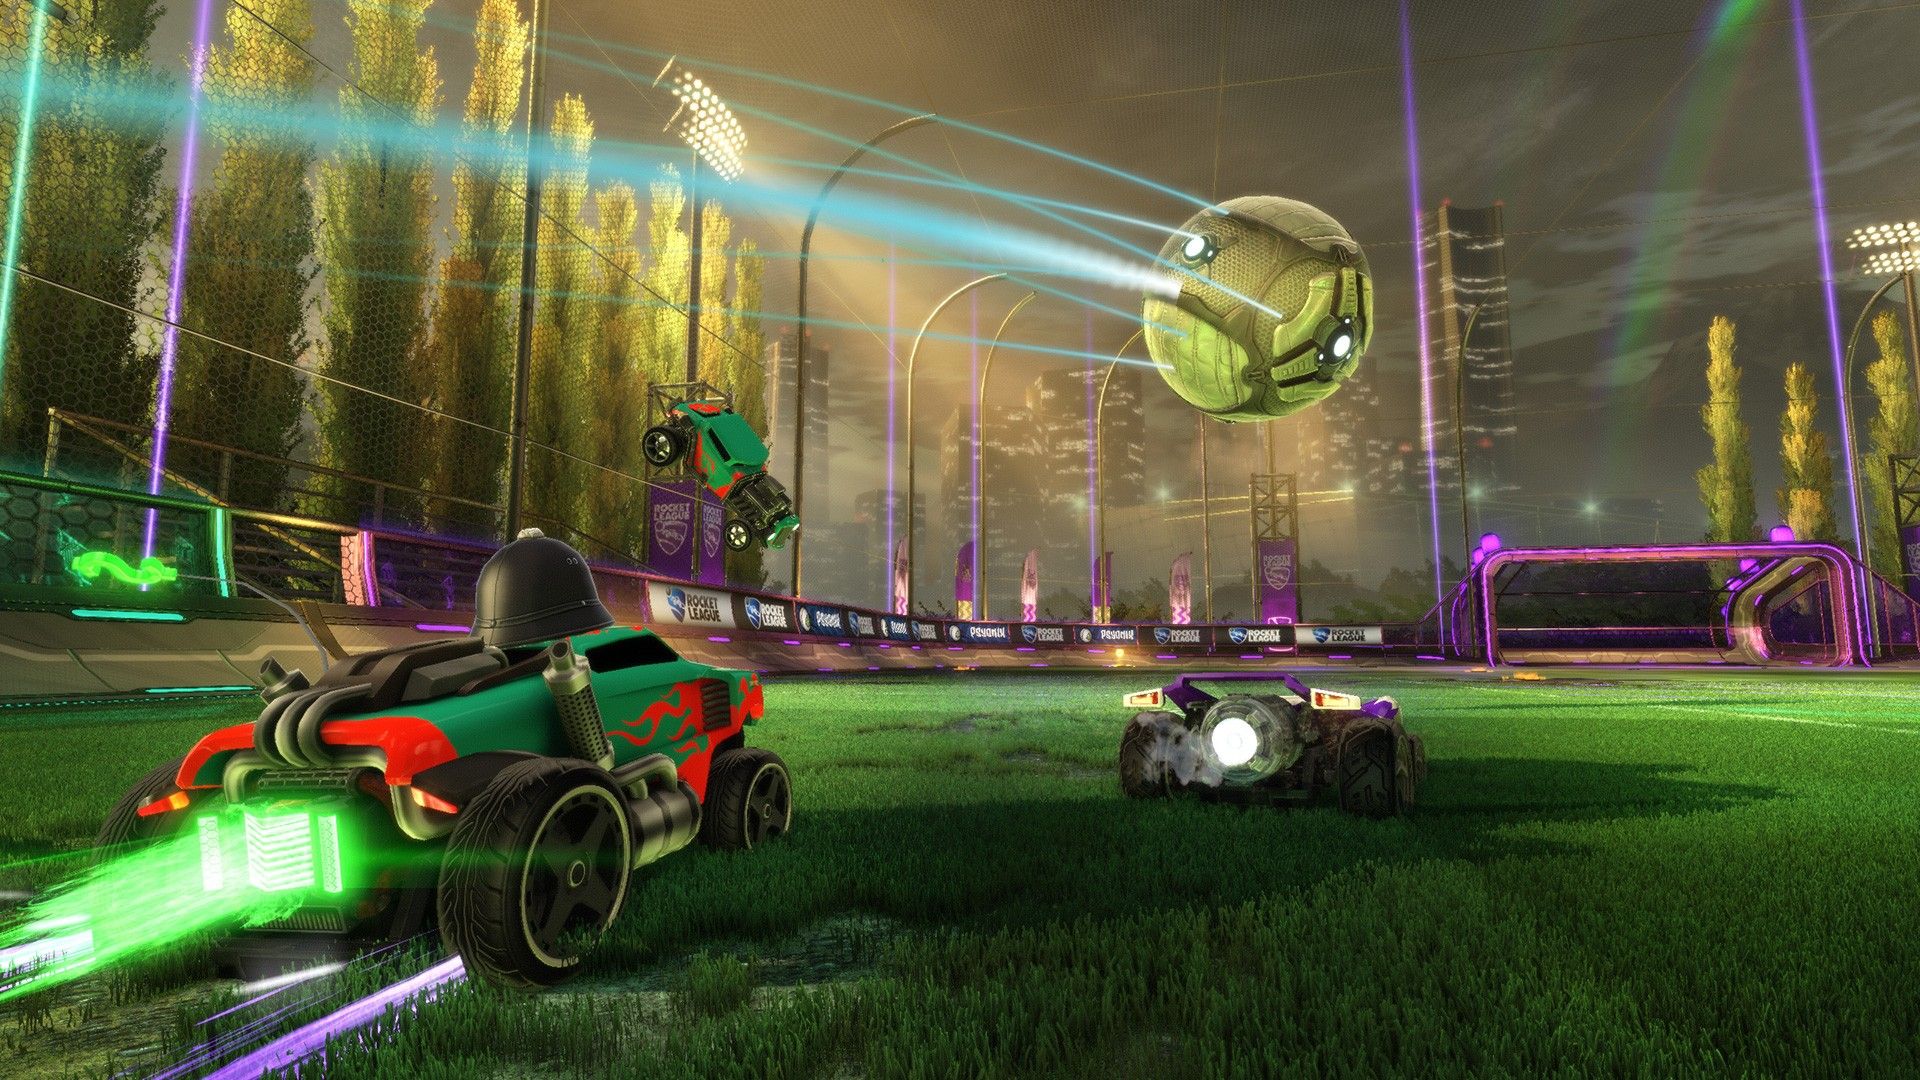 10 Essential Tips For Playing Rocket League